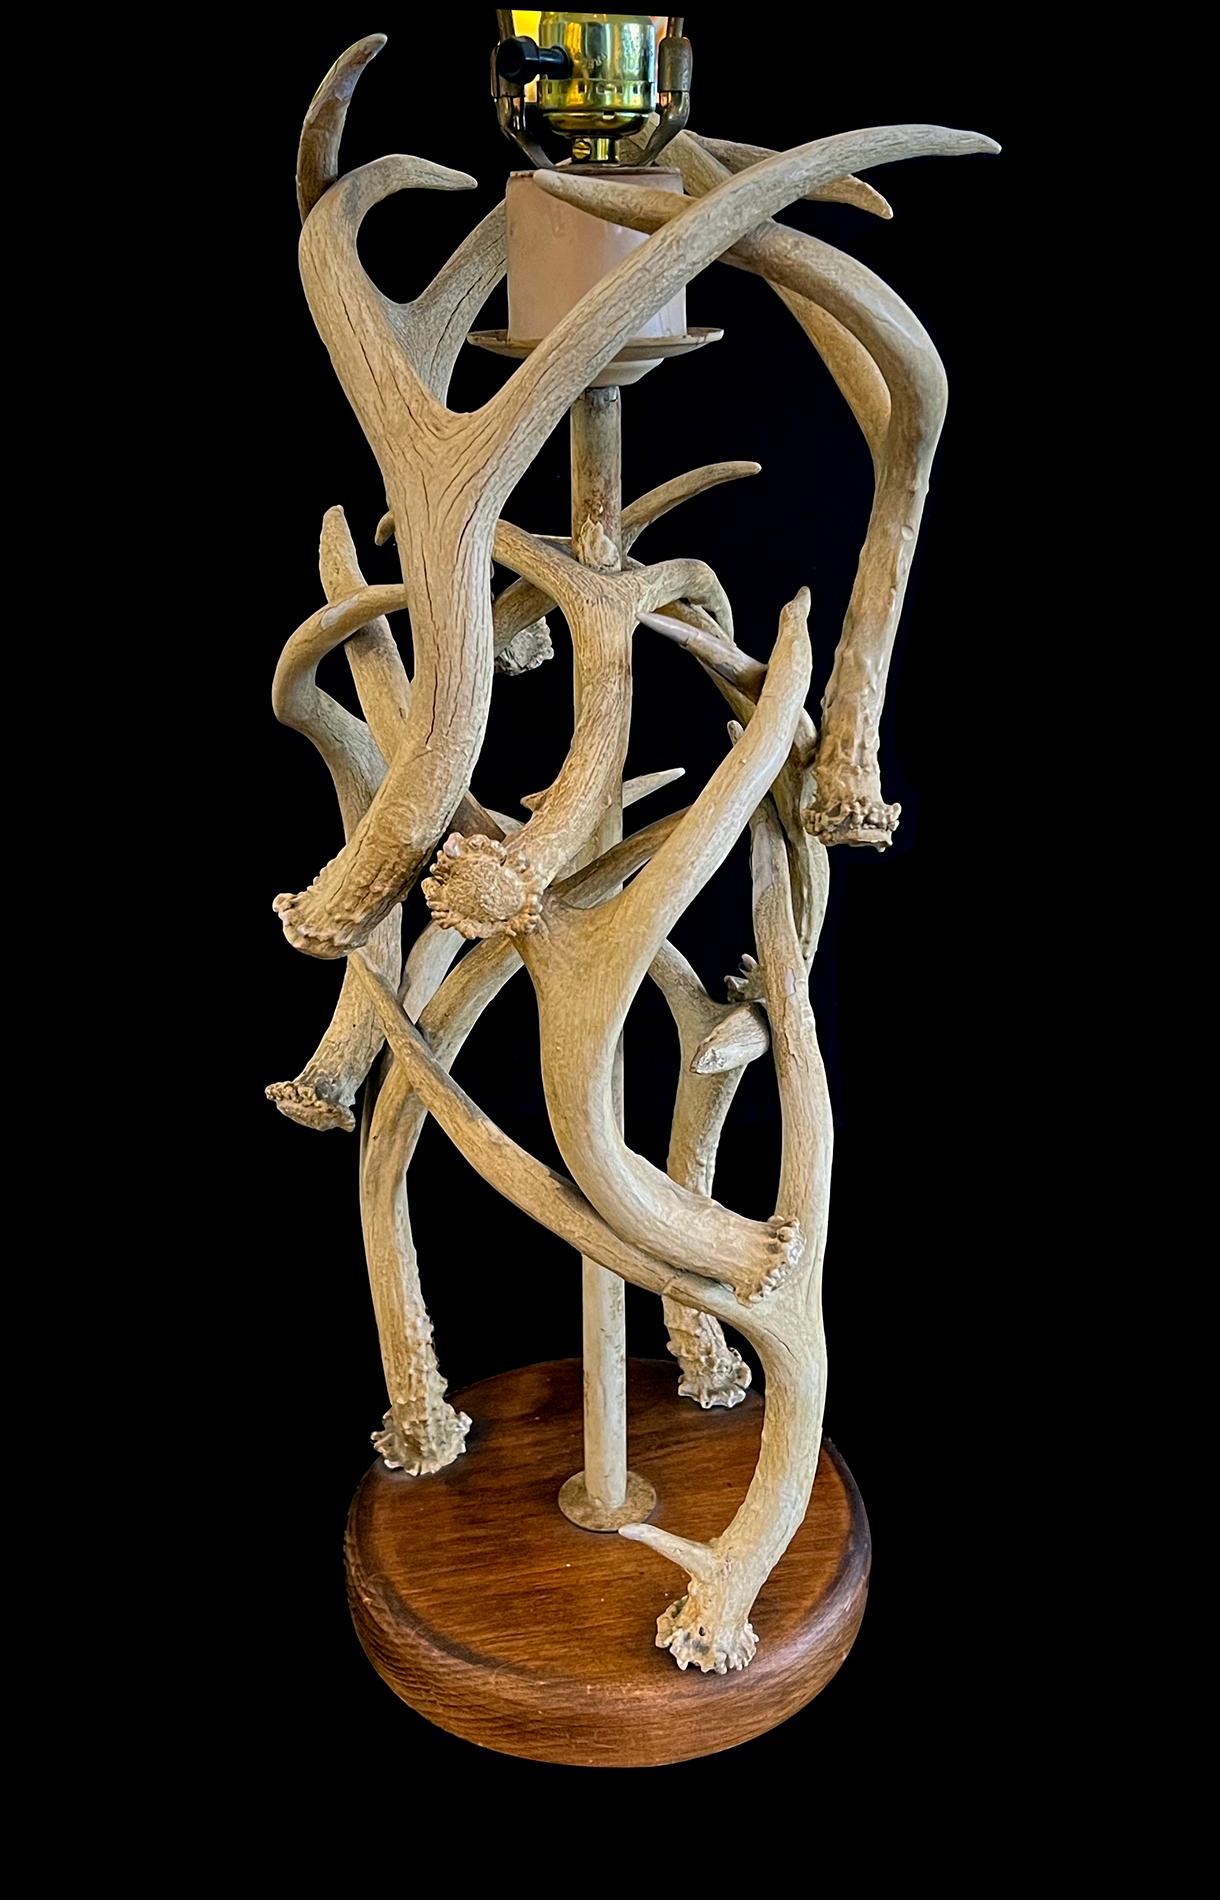 composed of interlocking antlers resting on a circular wooden base